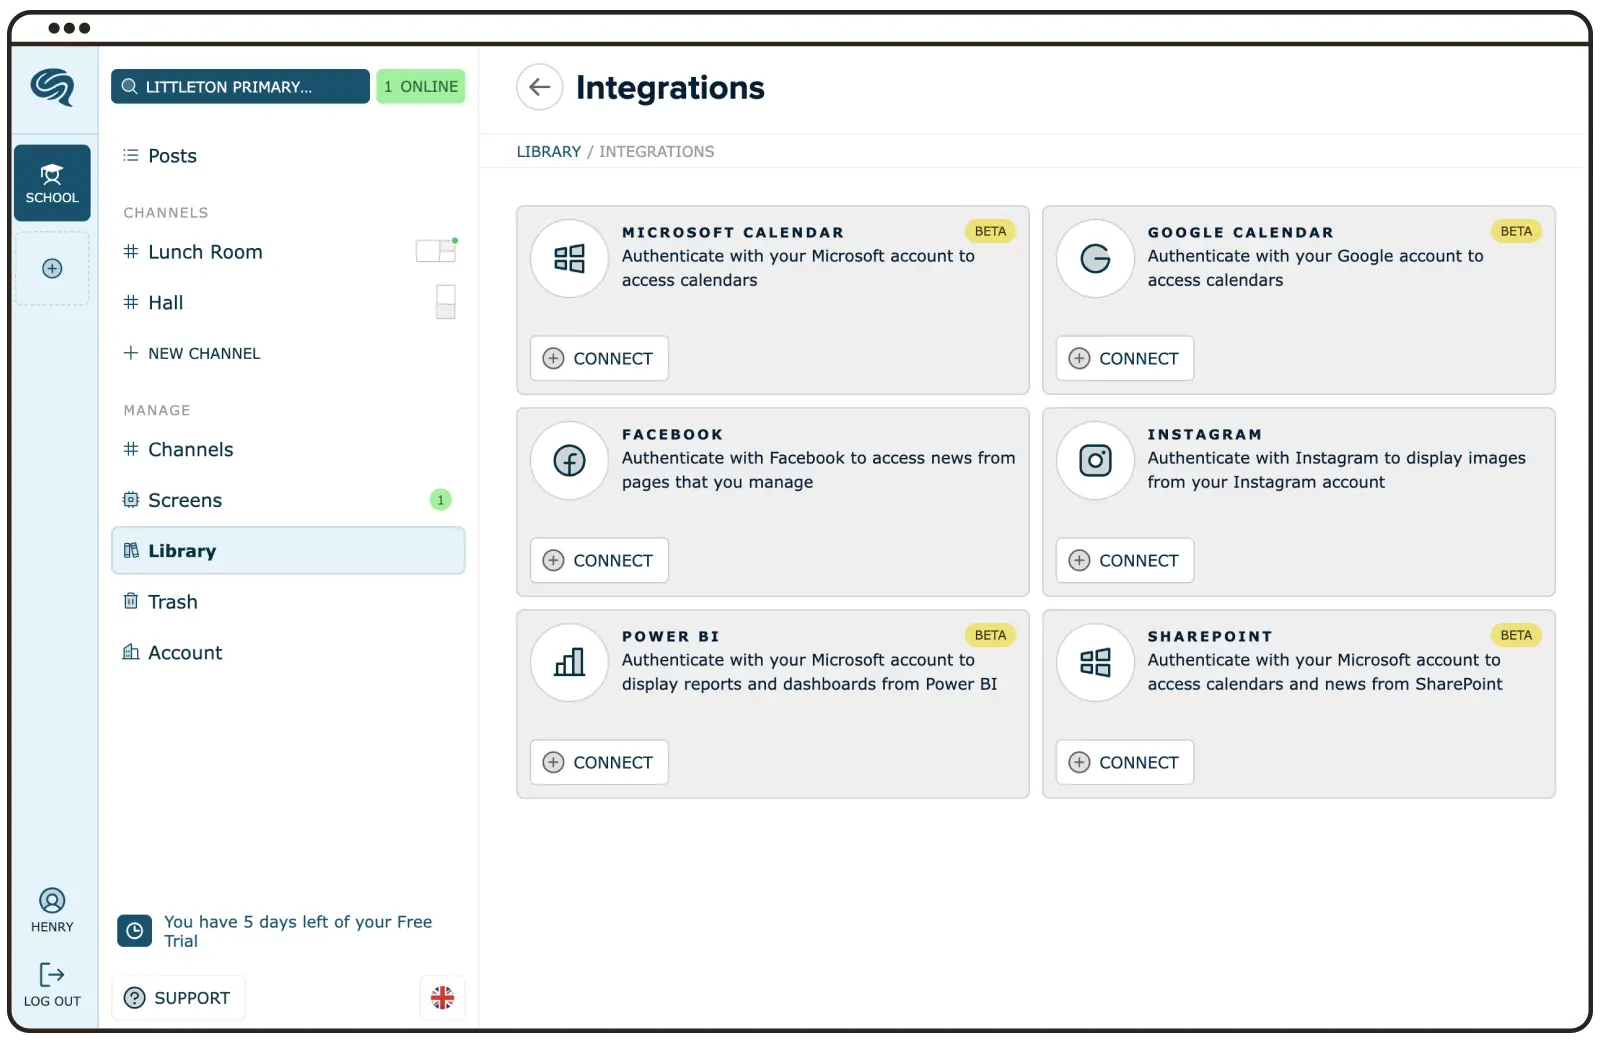 Screenshot from the user interface of PinToMind. Shows an overview of the integrations.